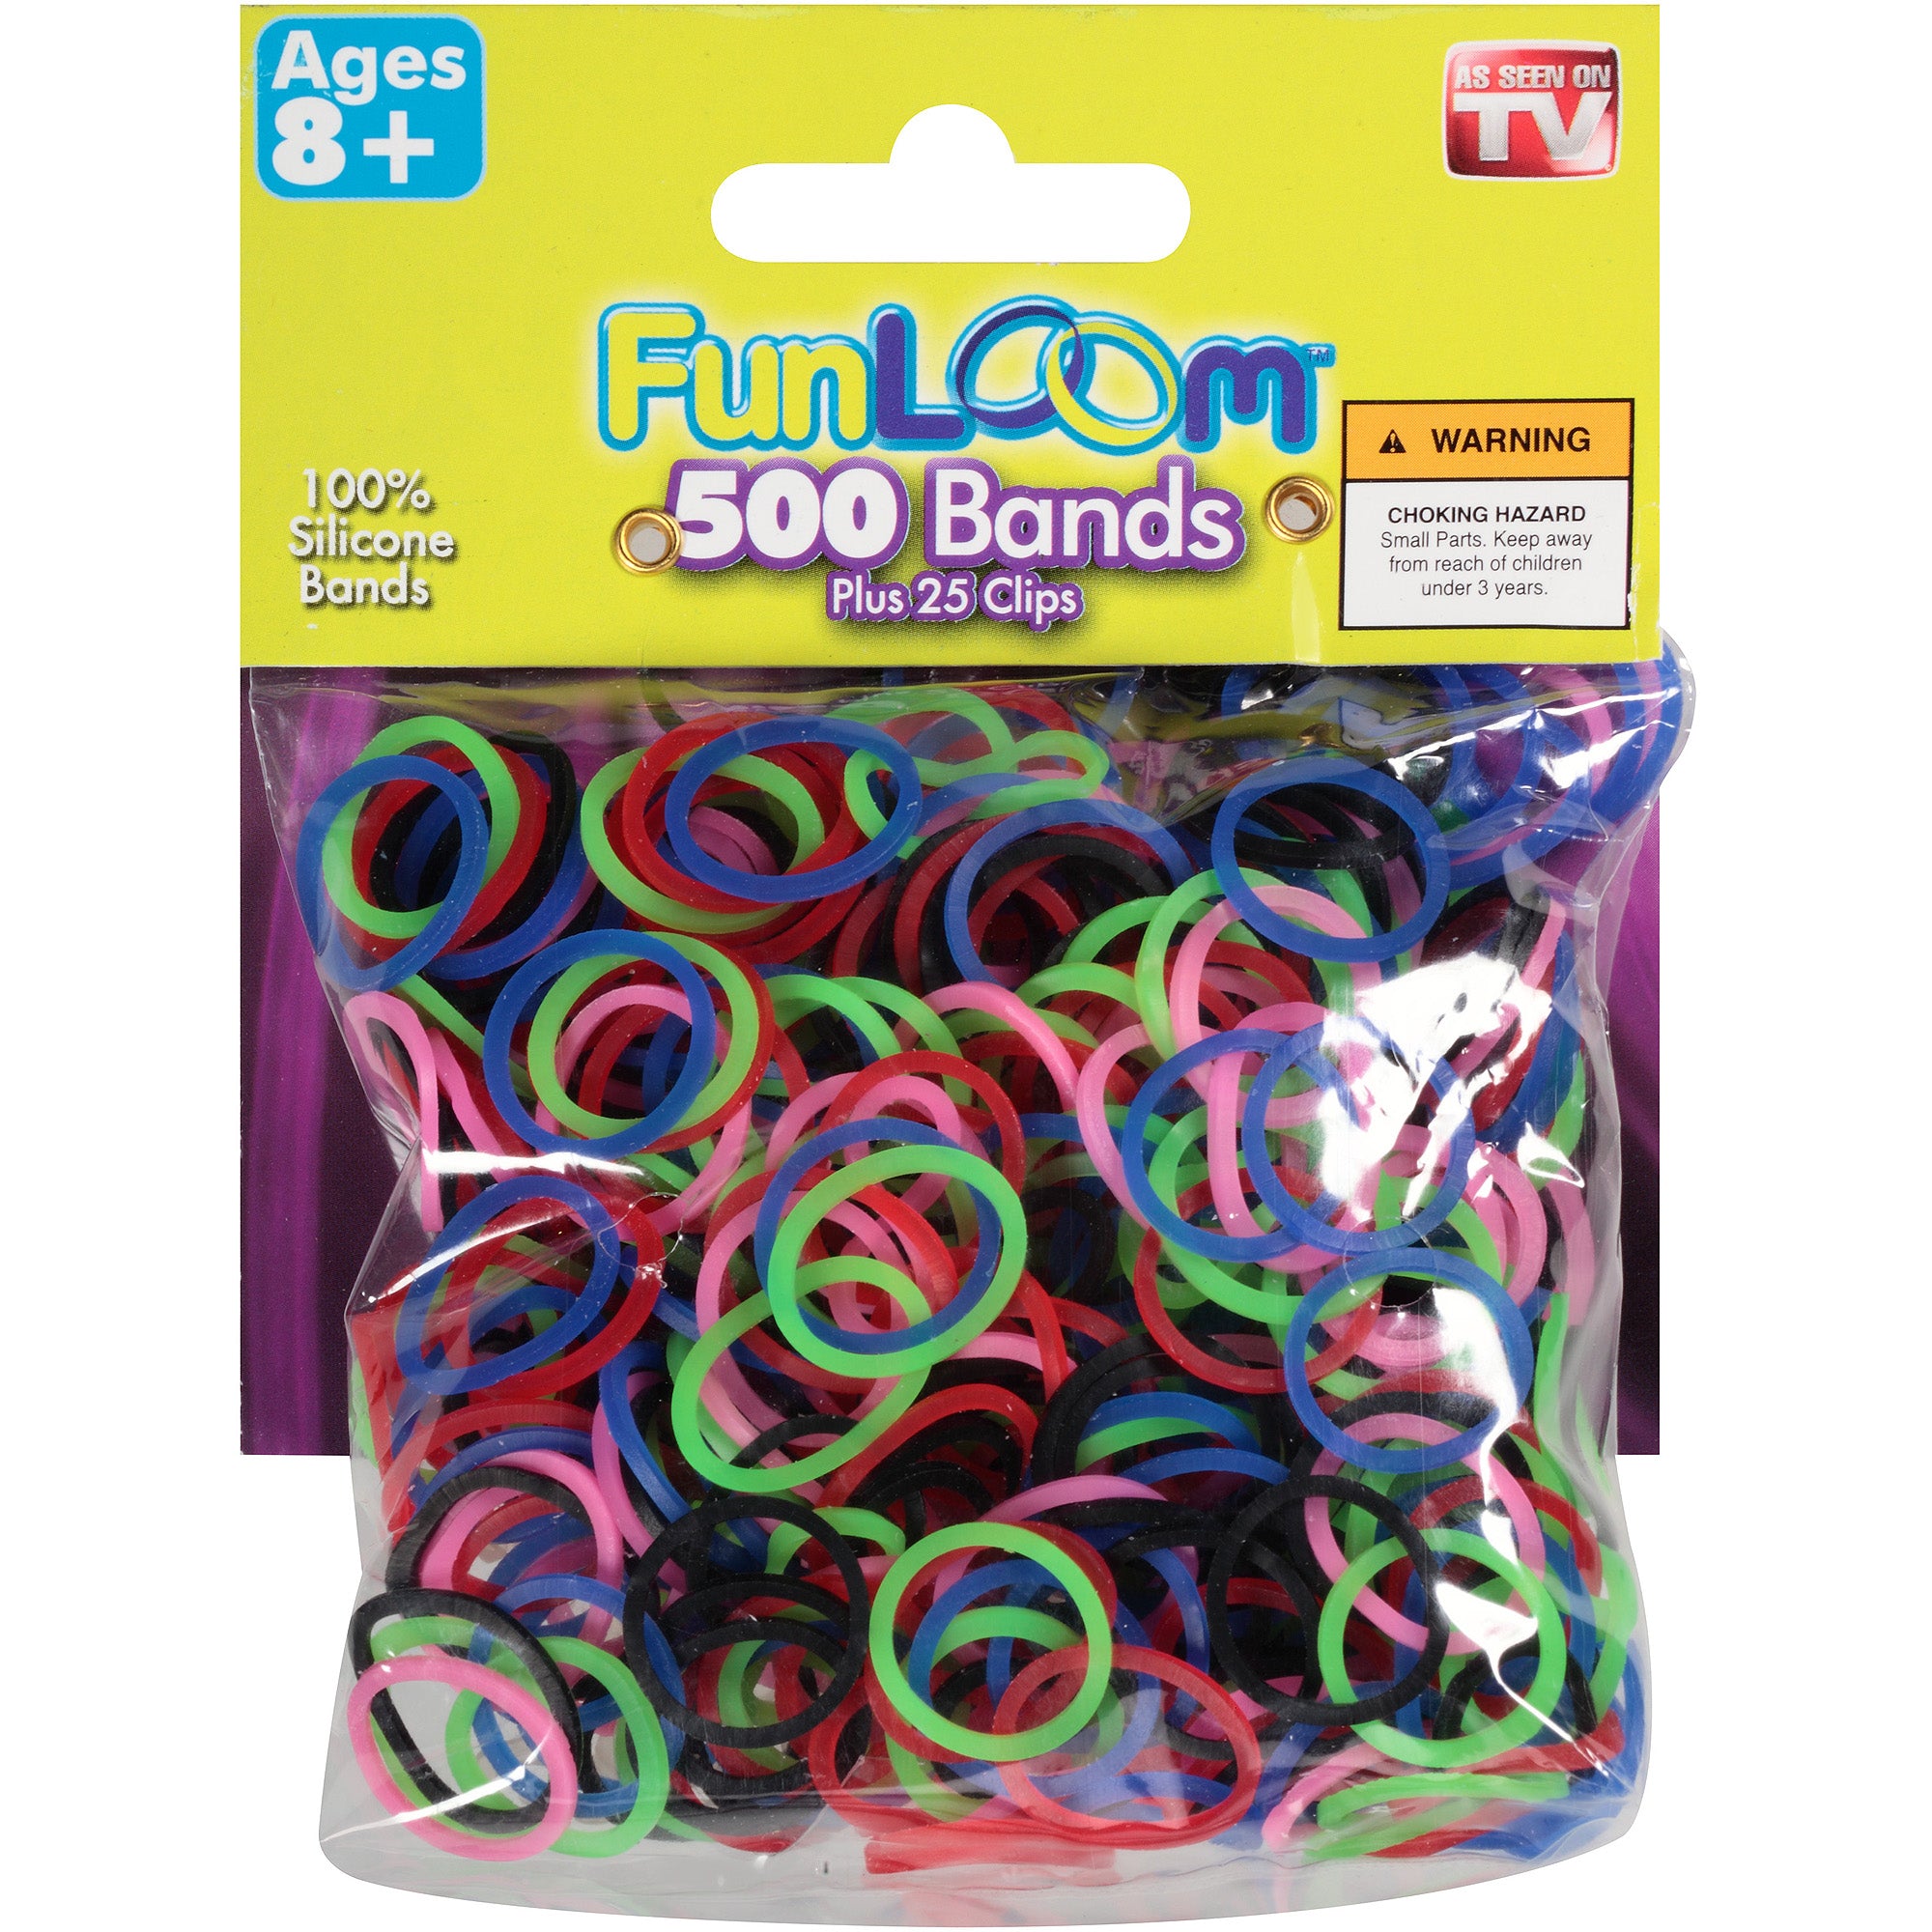 Fun Loom Mini Rubber band Silicone Bands for crafts & bracelet making or hair